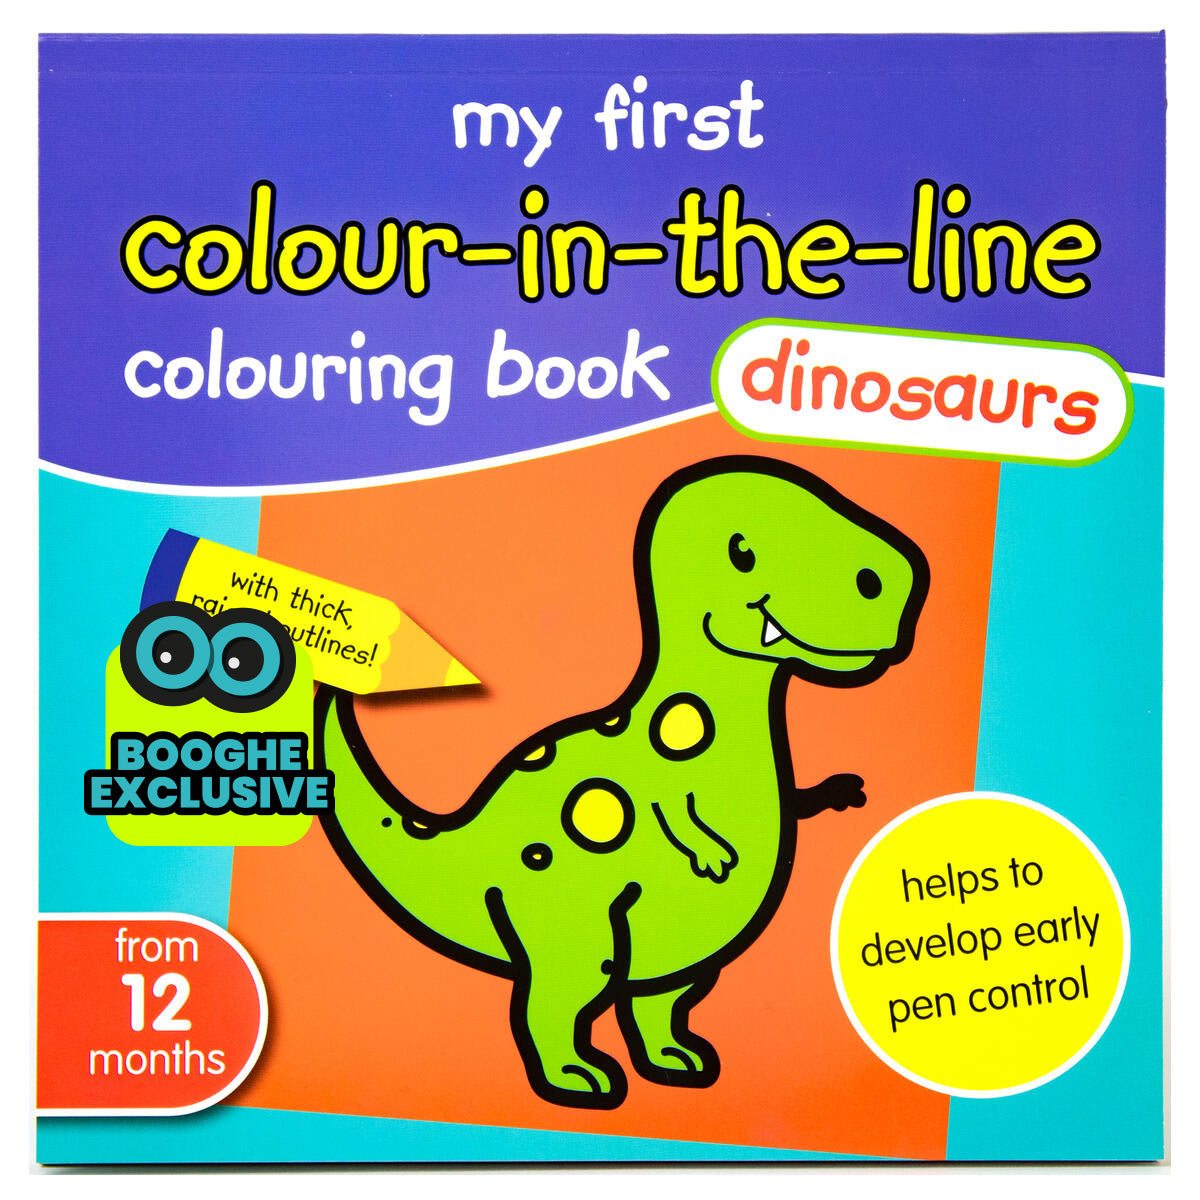 View the best prices for: my first colour-in-the-line colouring book dinosaurs